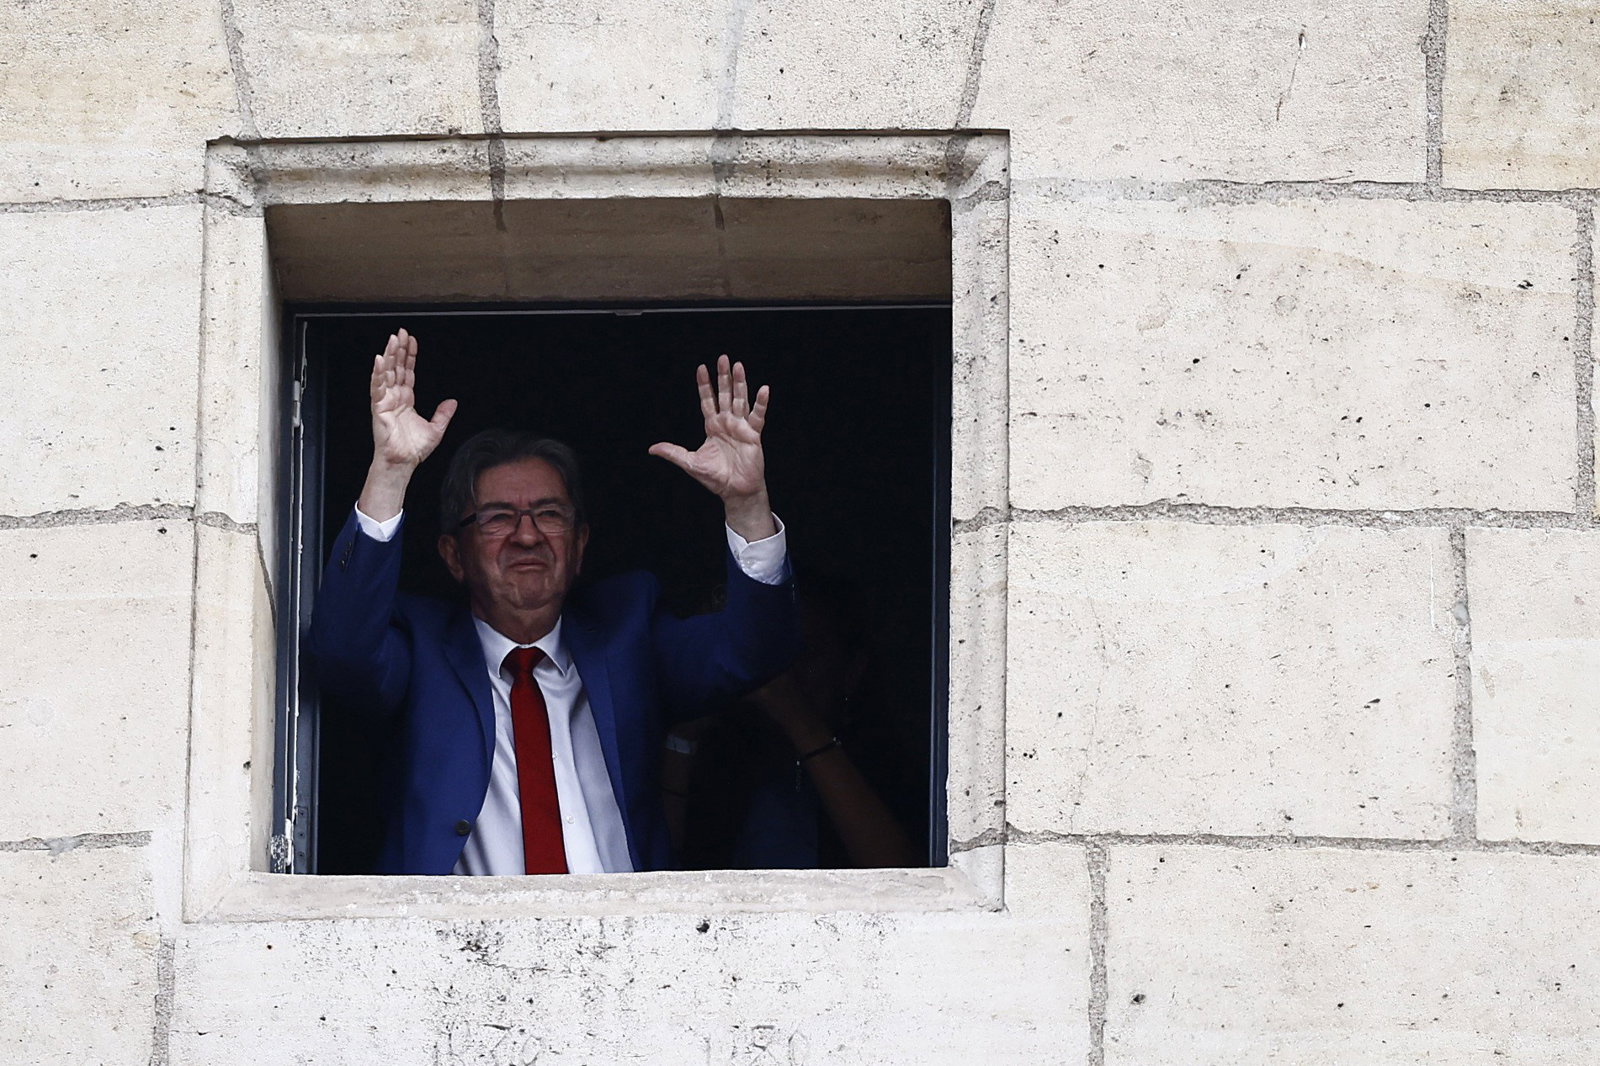 A man waves out a stone window 